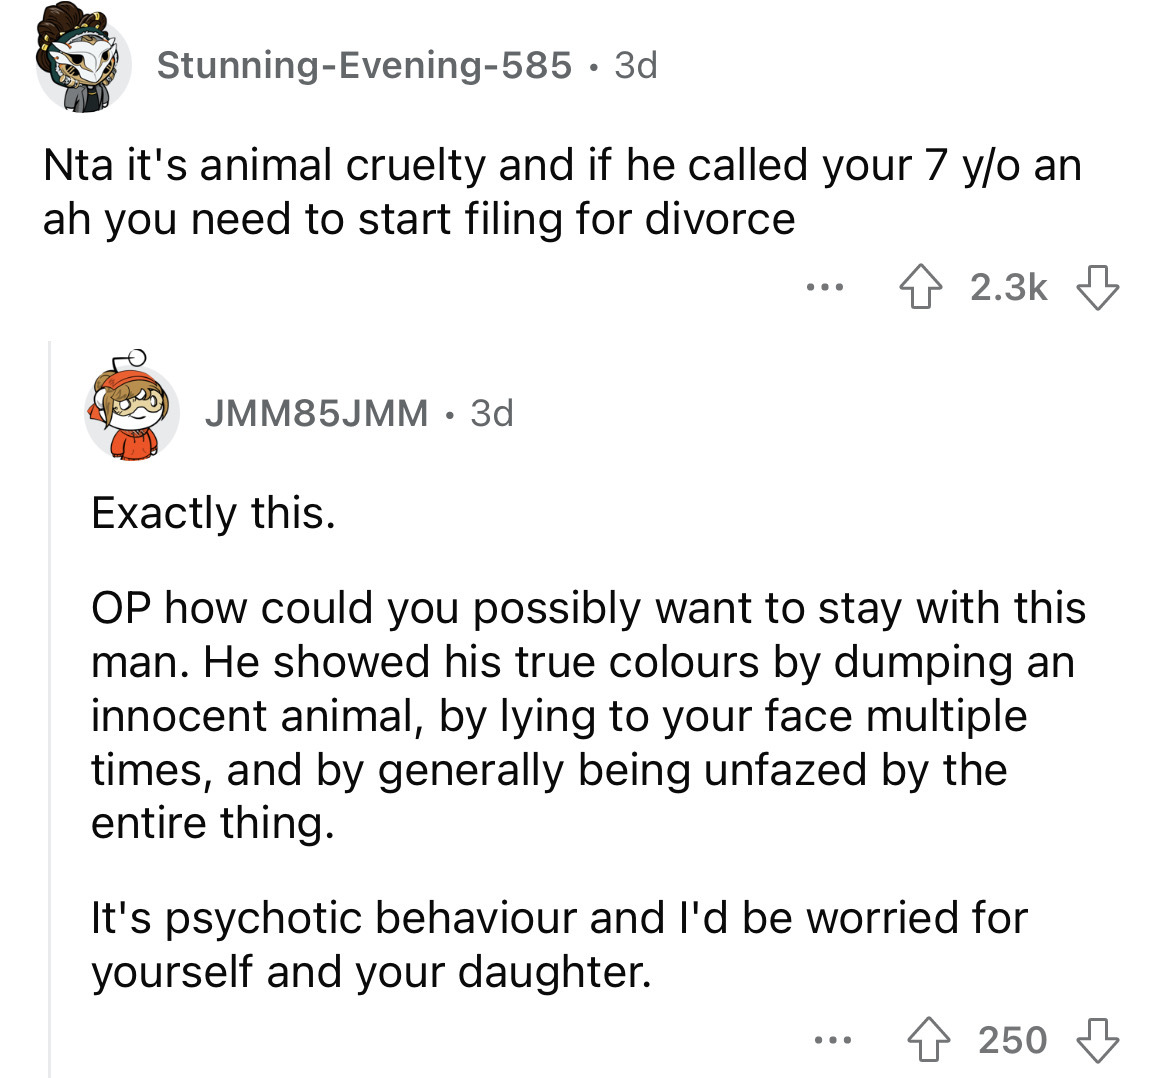 angle - StunningEvening585 3d Nta it's animal cruelty and if he called your 7 yo an ah you need to start filing for divorce JMM85JMM 3d ... Exactly this. Op how could you possibly want to stay with this man. He showed his true colours by dumping an innoce